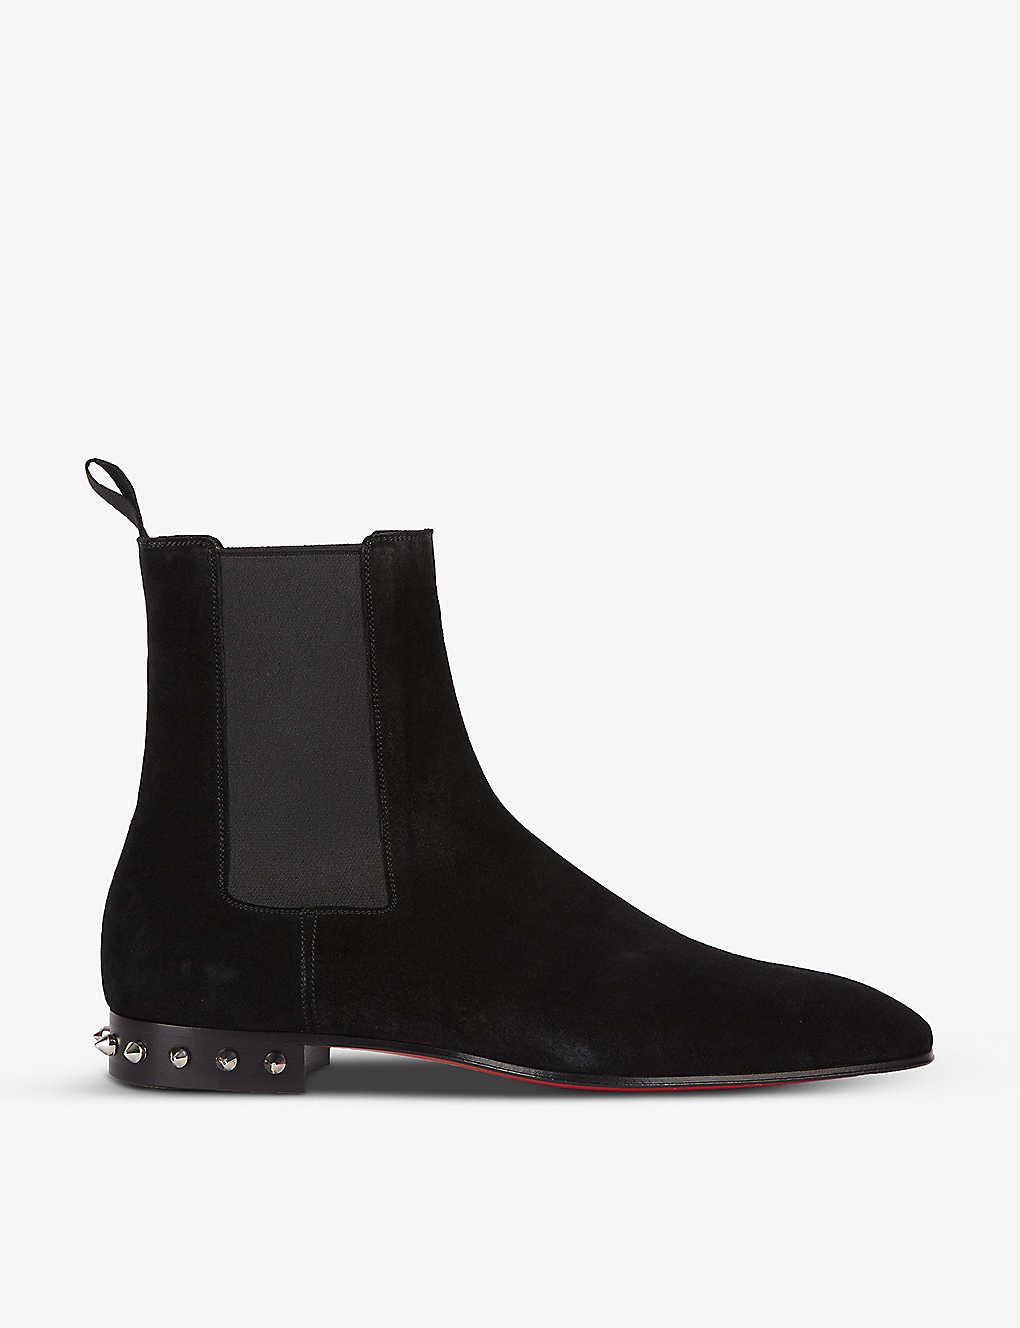 Christian Louboutin Roadie Flat  Red bottom heels christian louboutin,  Christian louboutin men, Chelsea boots